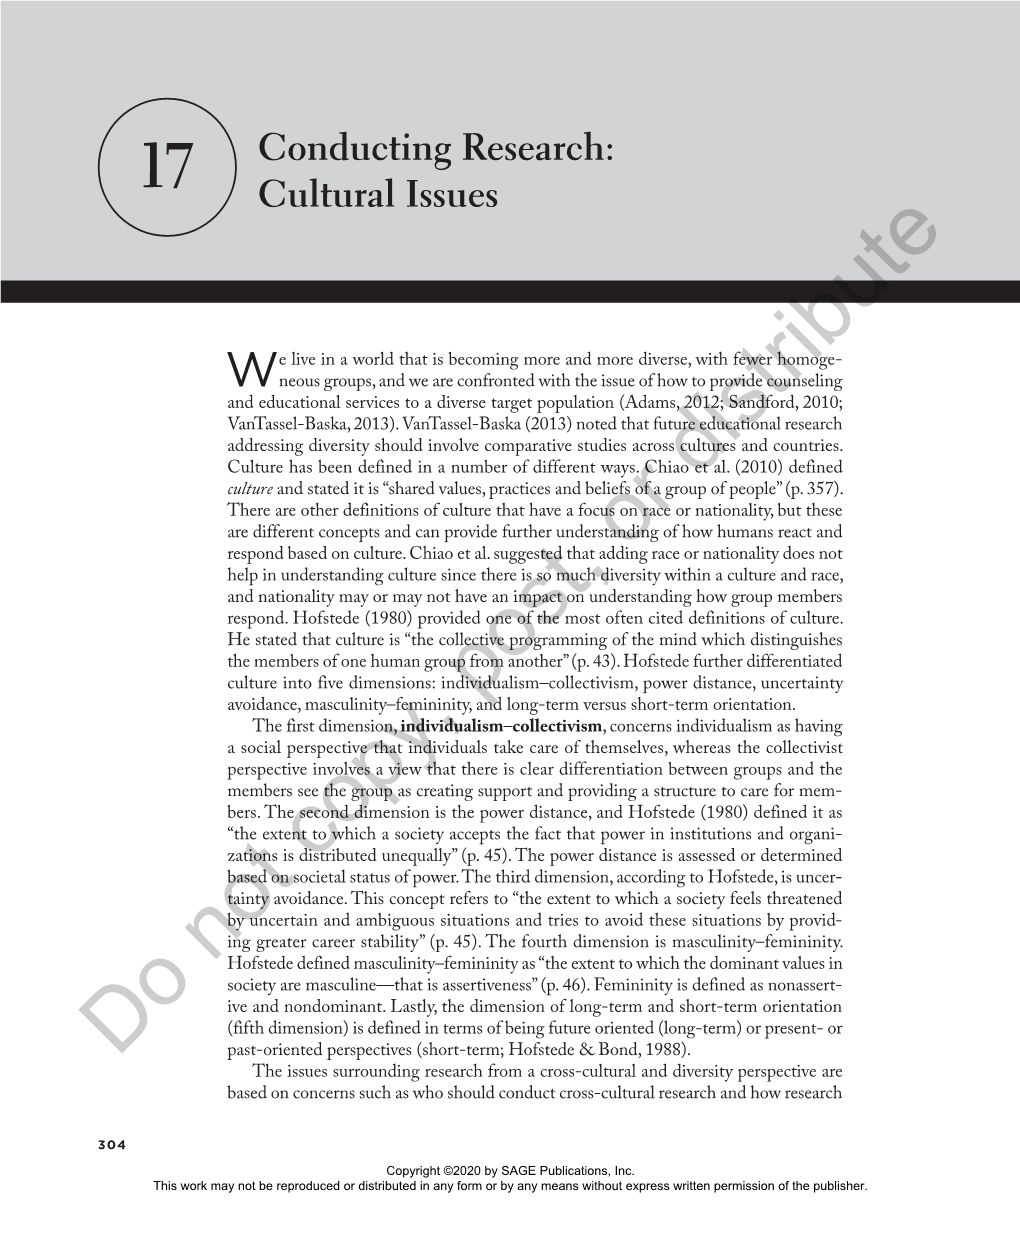 Chapter 17: Conducting Research: Cultural Issues